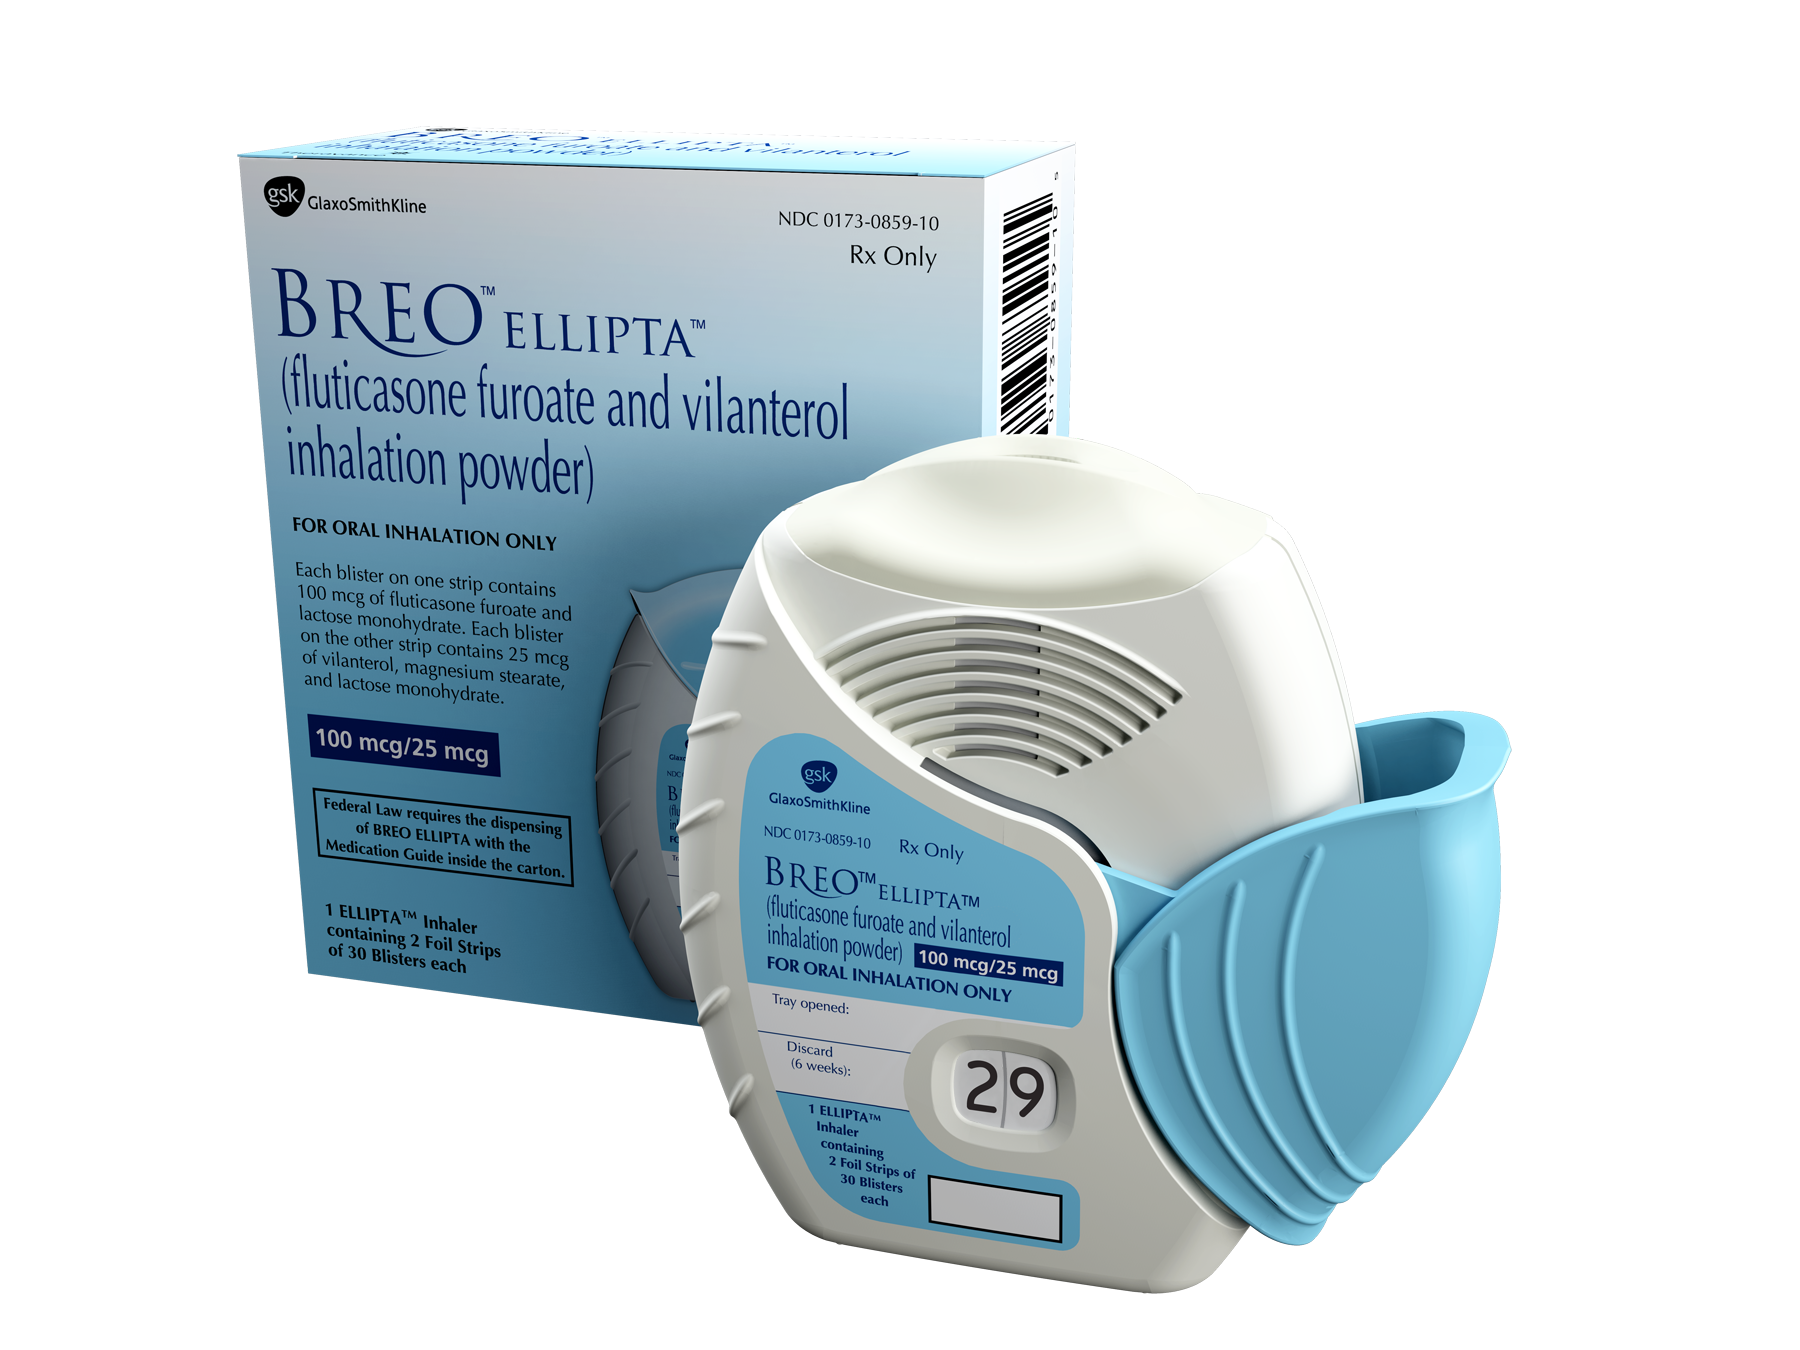 Breo Ellipta Now Approved as Asthma Treatment for Adult Patients in Canada